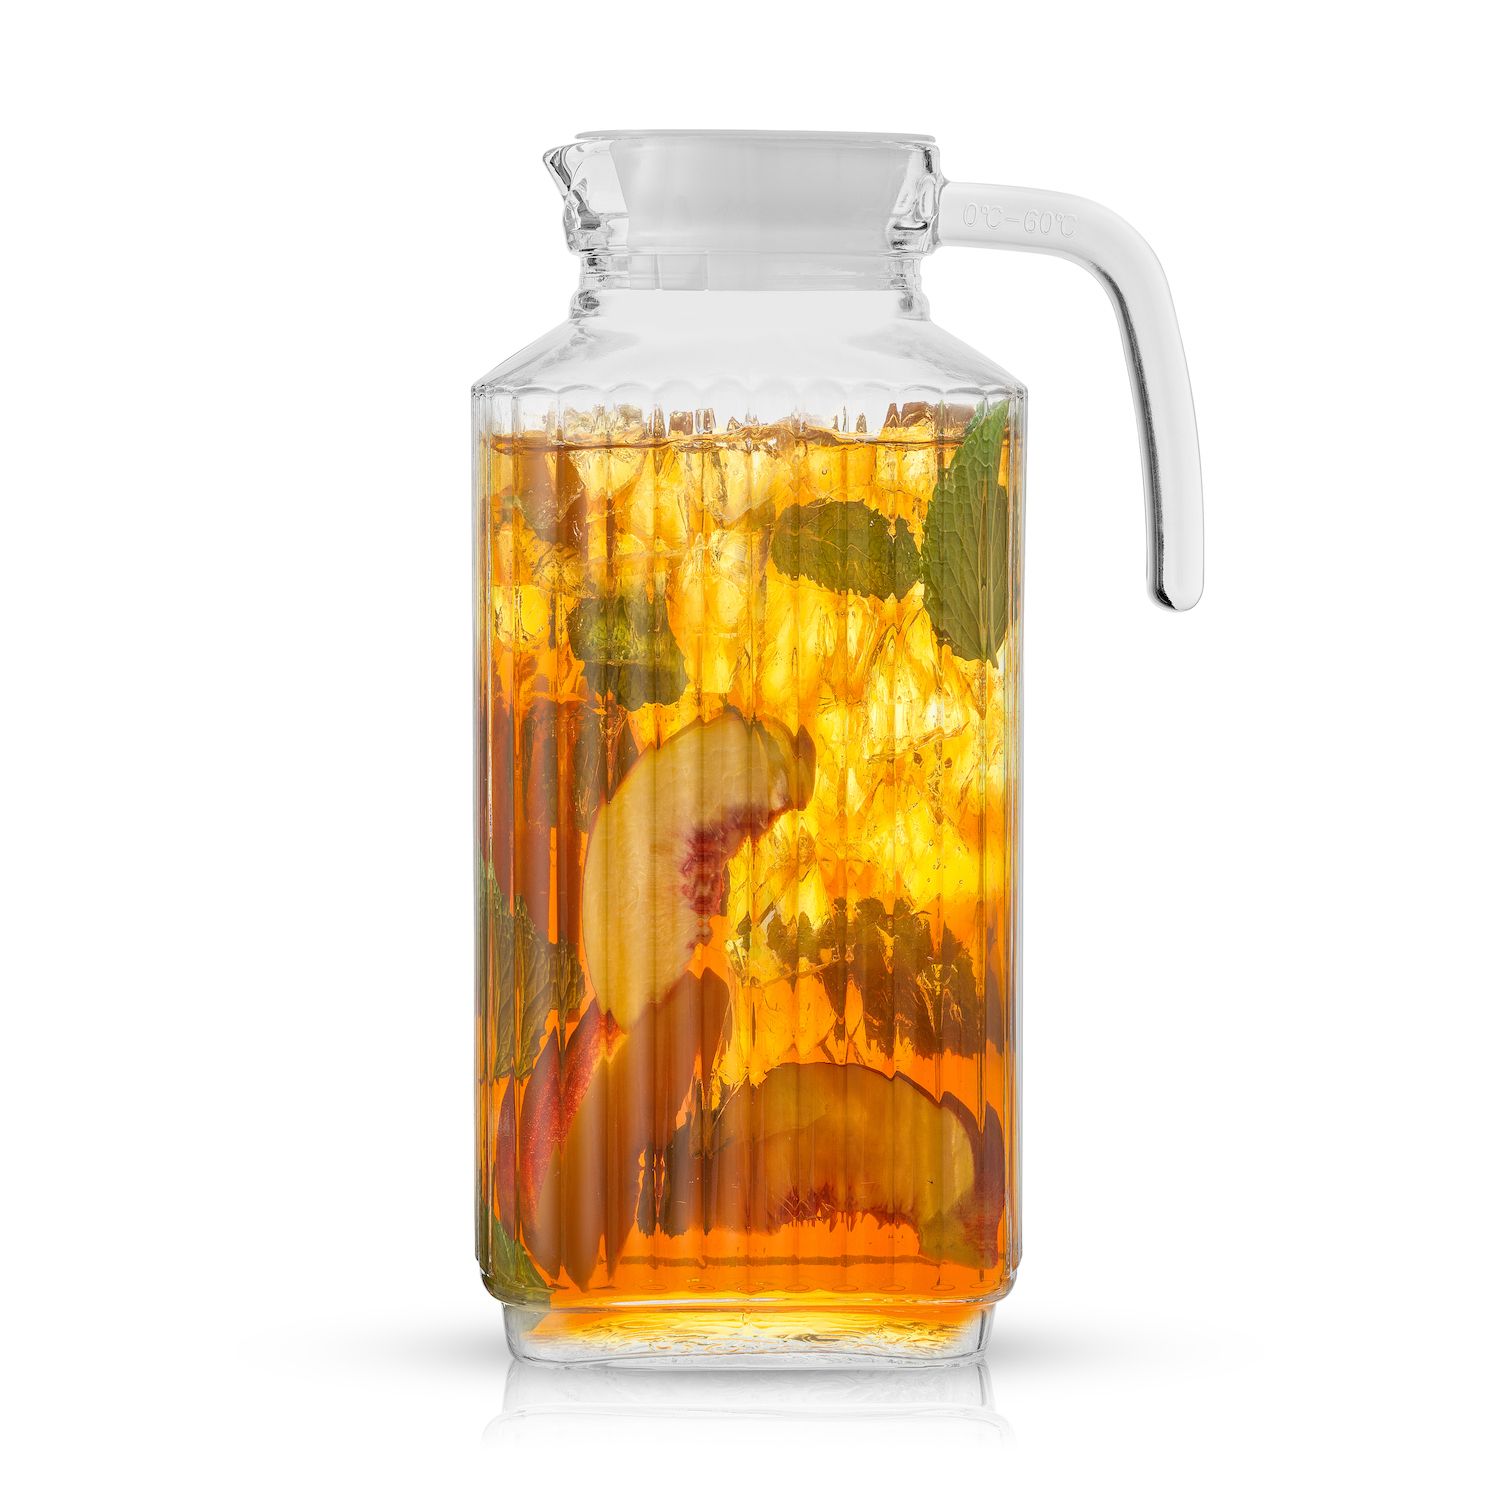 Grosche Bali Iced Tea & Infused Water Pitcher With Stainless Steel